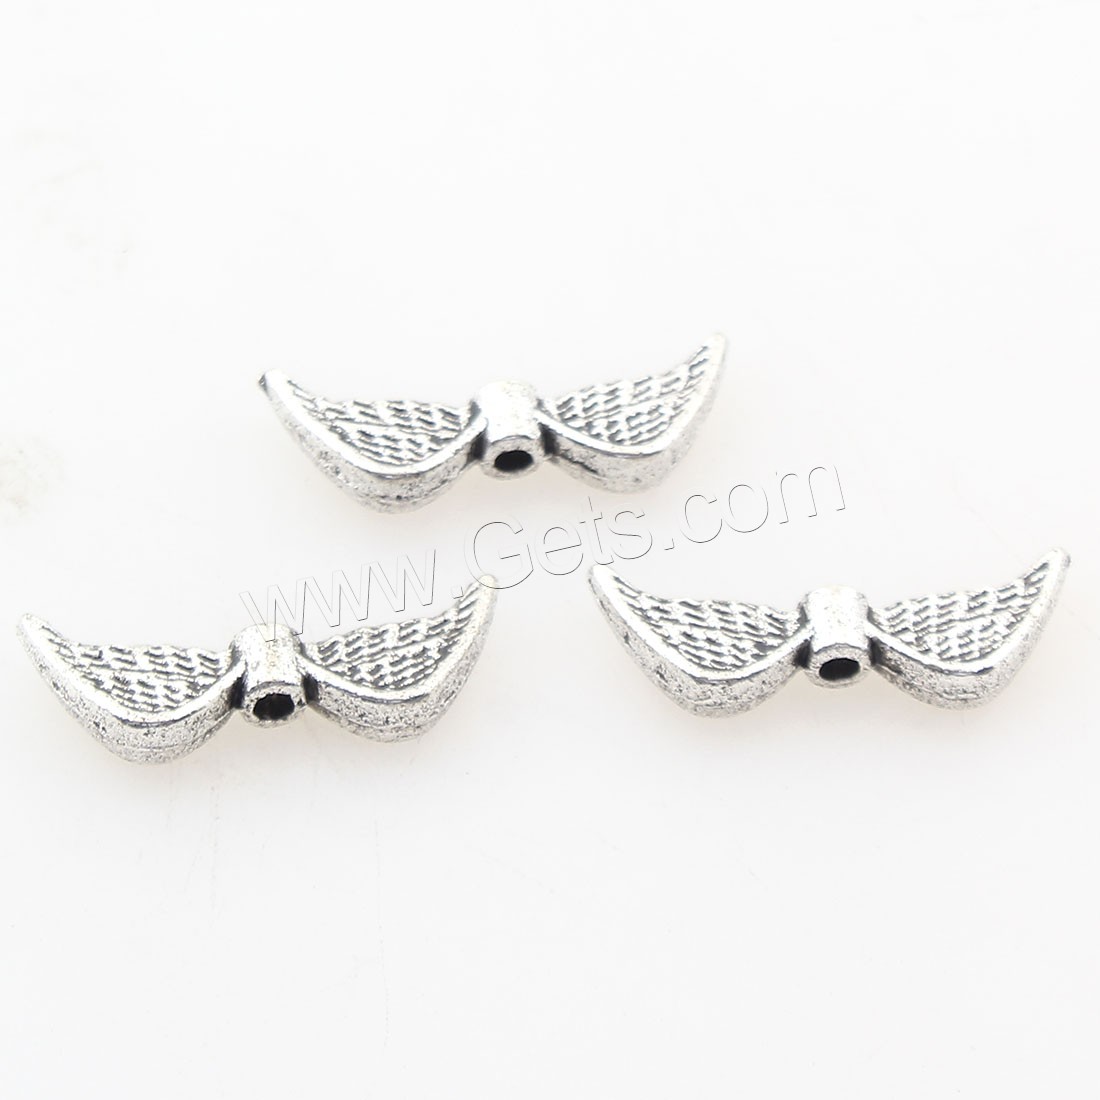 Zinc Alloy Jewelry Beads, antique silver color plated, more colors for choice, 21x7mm, Hole:Approx 1mm, Approx 450PCs/Bag, Sold By Bag